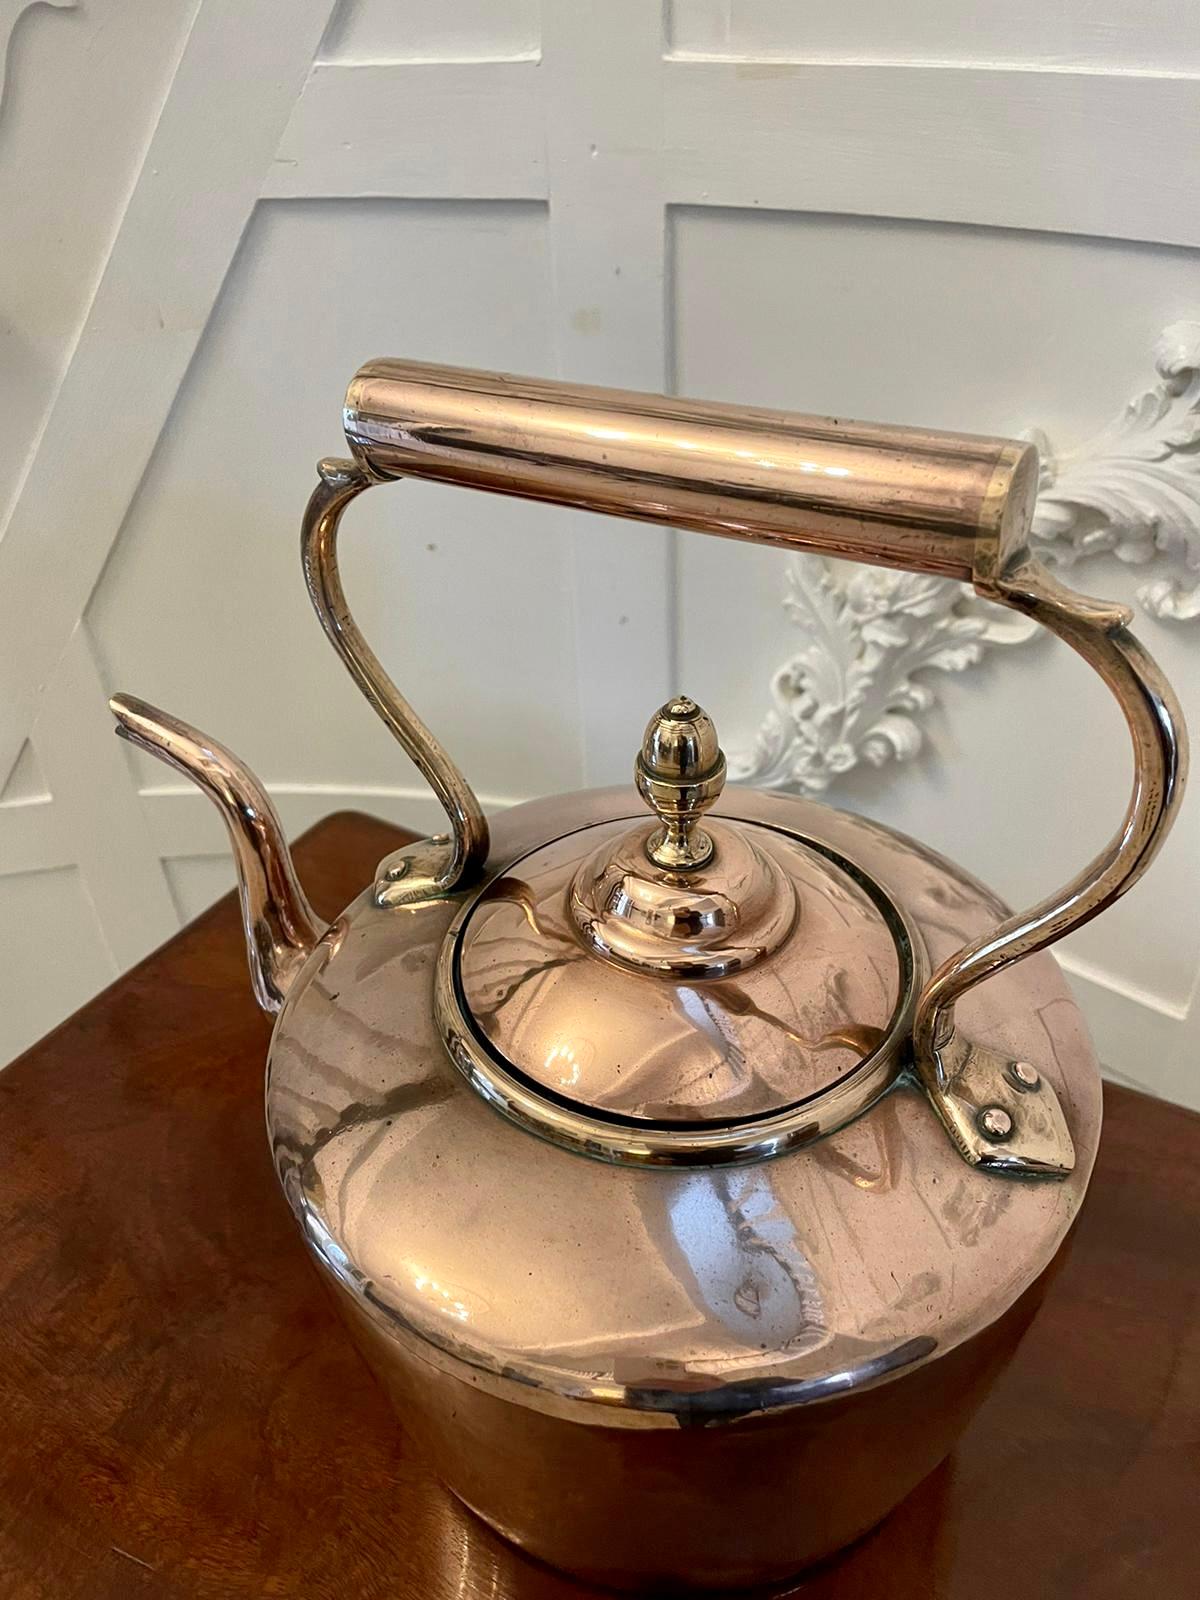 Antique George III quality copper kettle having a quality shaped handle and spout and lift off lid.

In lovely original condition. 

Measures: H 33cm x W 33cm x D 25cm
Date 1800
 